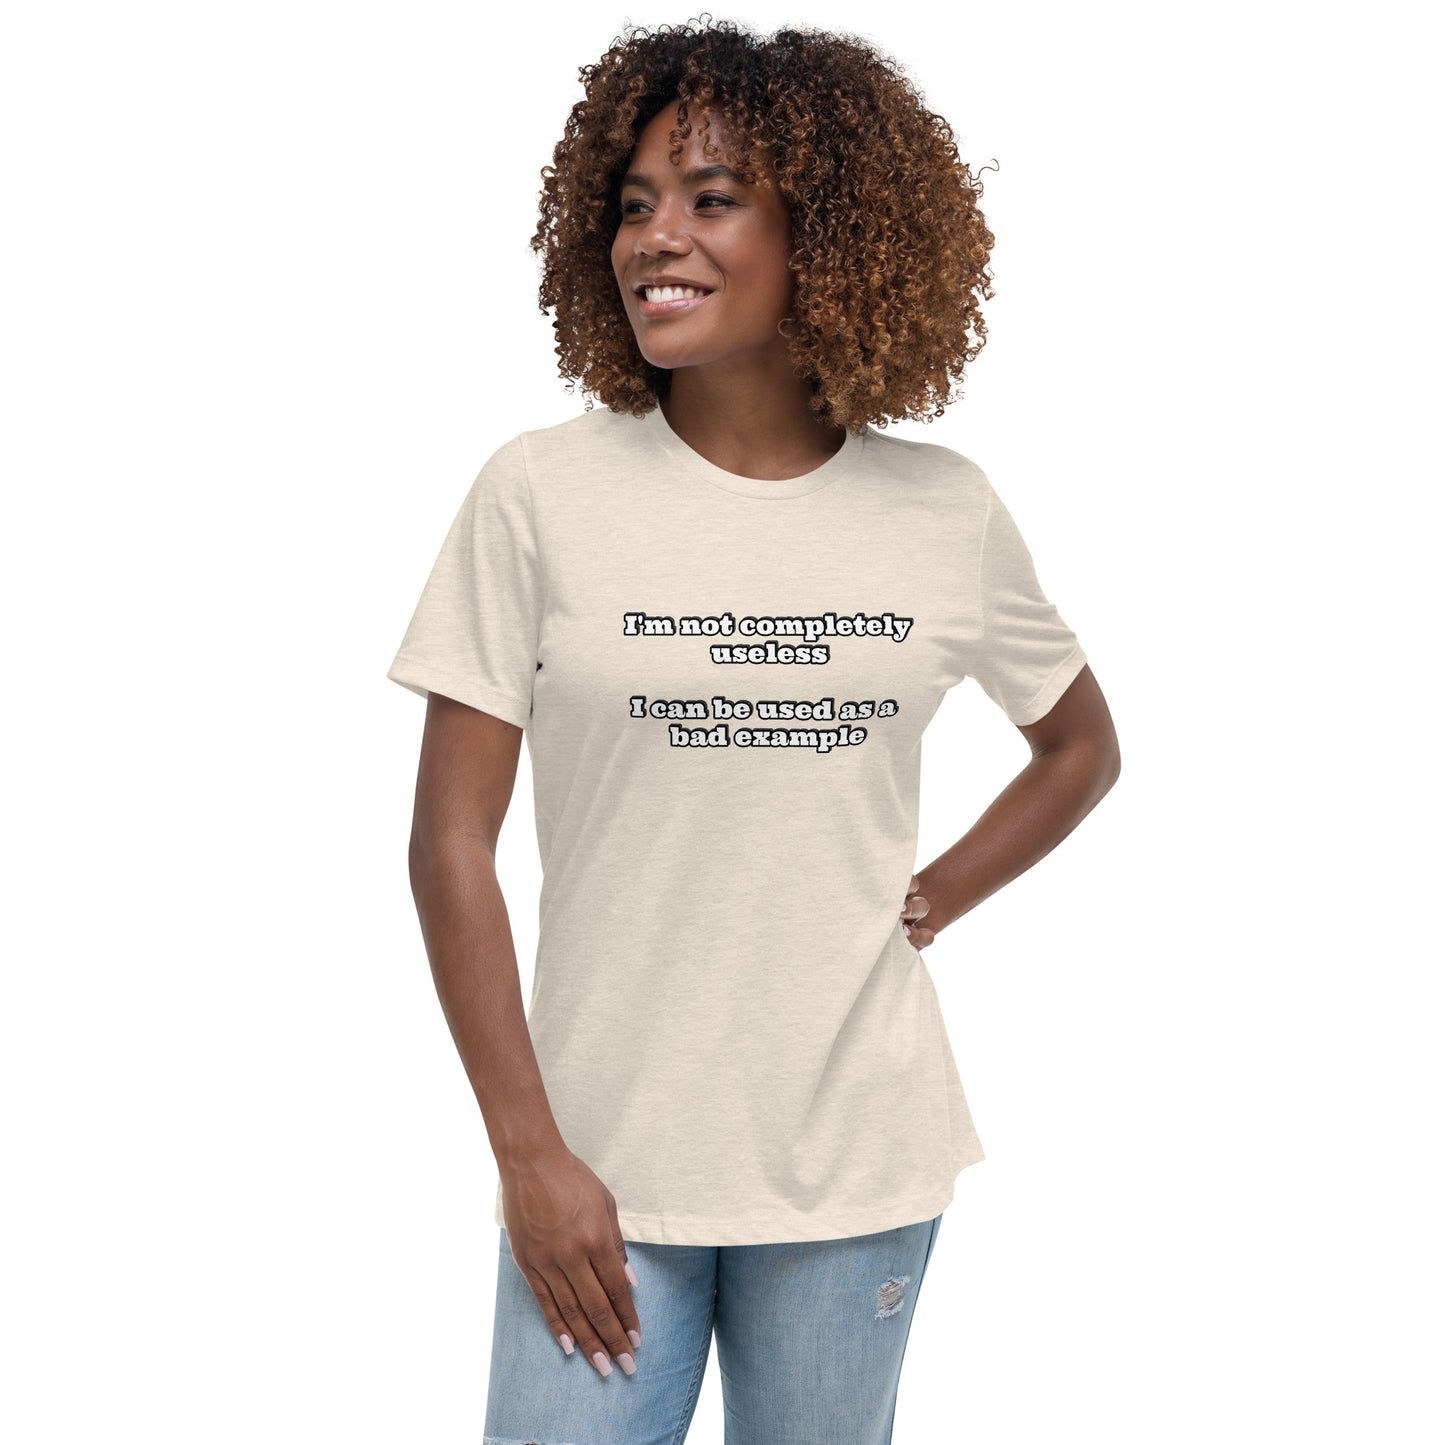 Women with prism natural t-shirt with text “I'm not completely useless I can be used as a bad example”